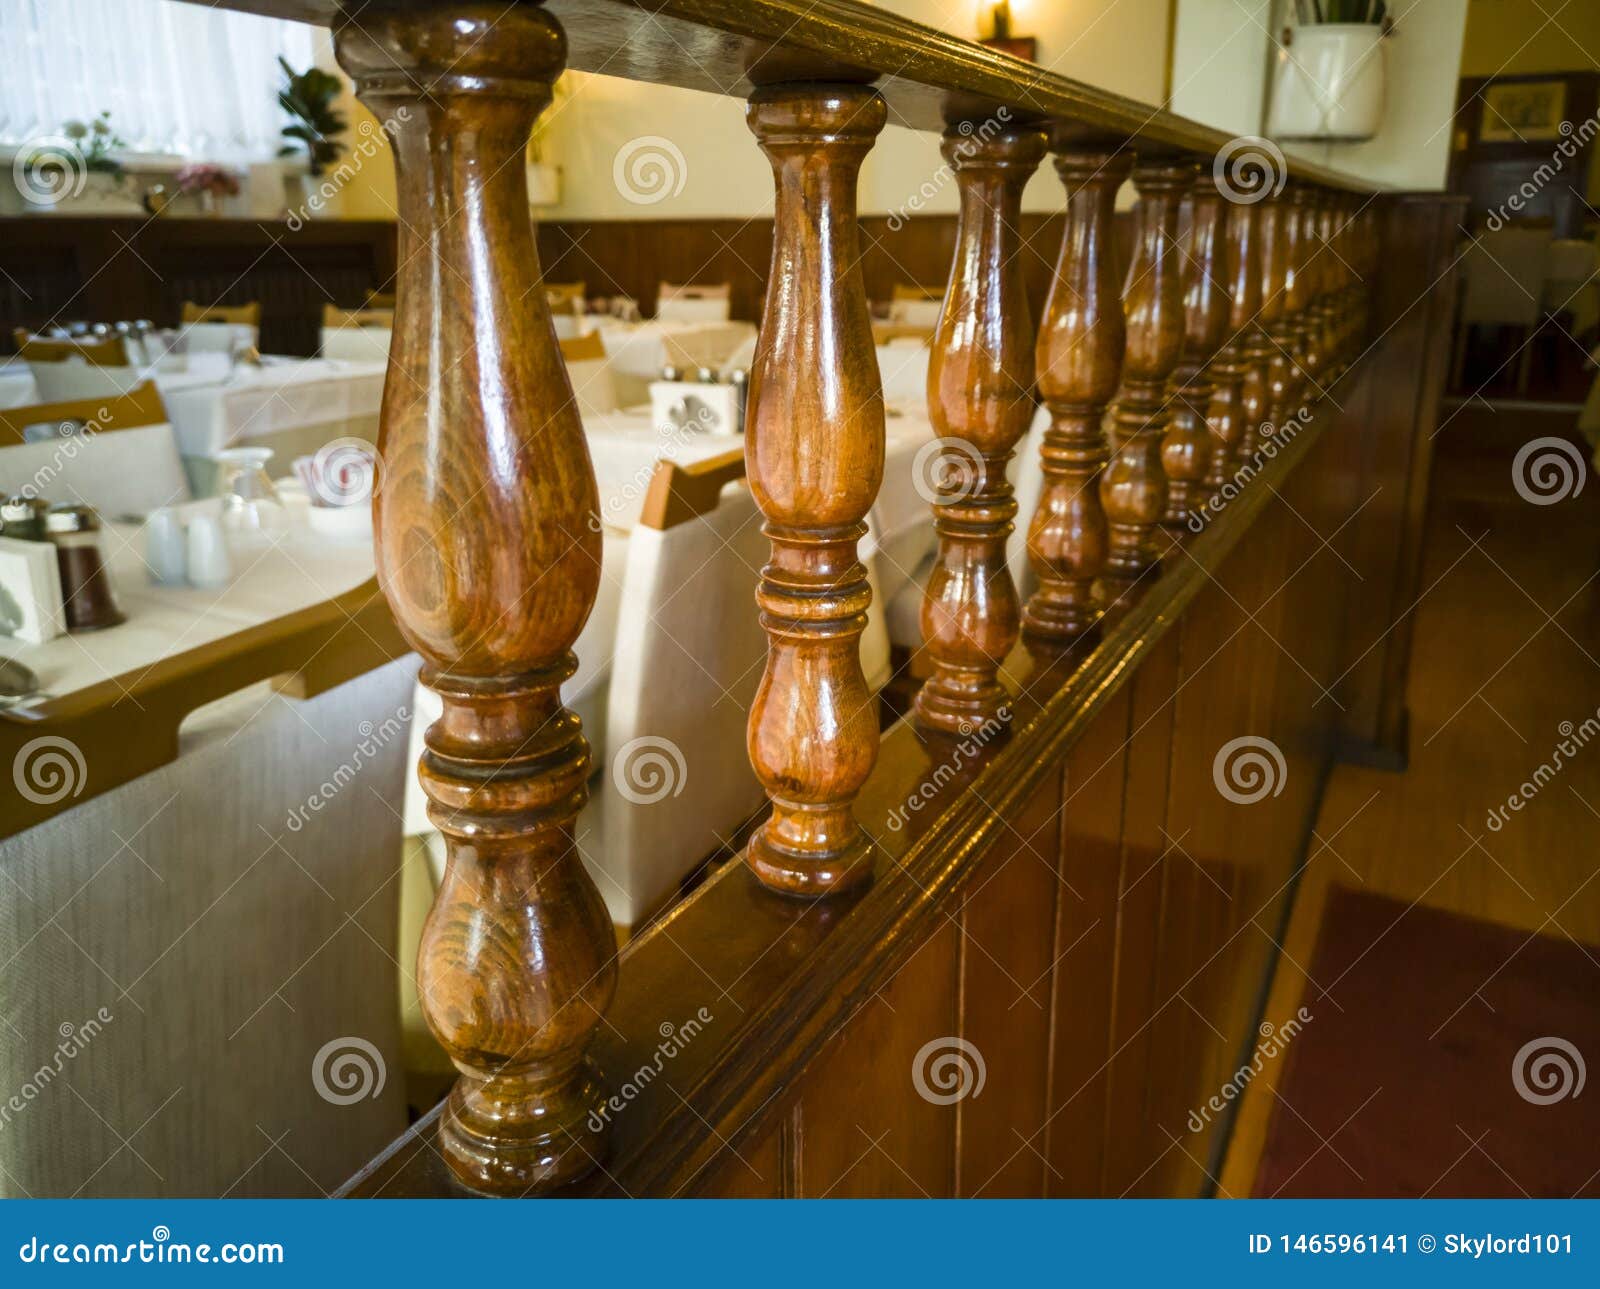 Interior of an Old Tavern with Old Wooden Furniture Stock Image - Image